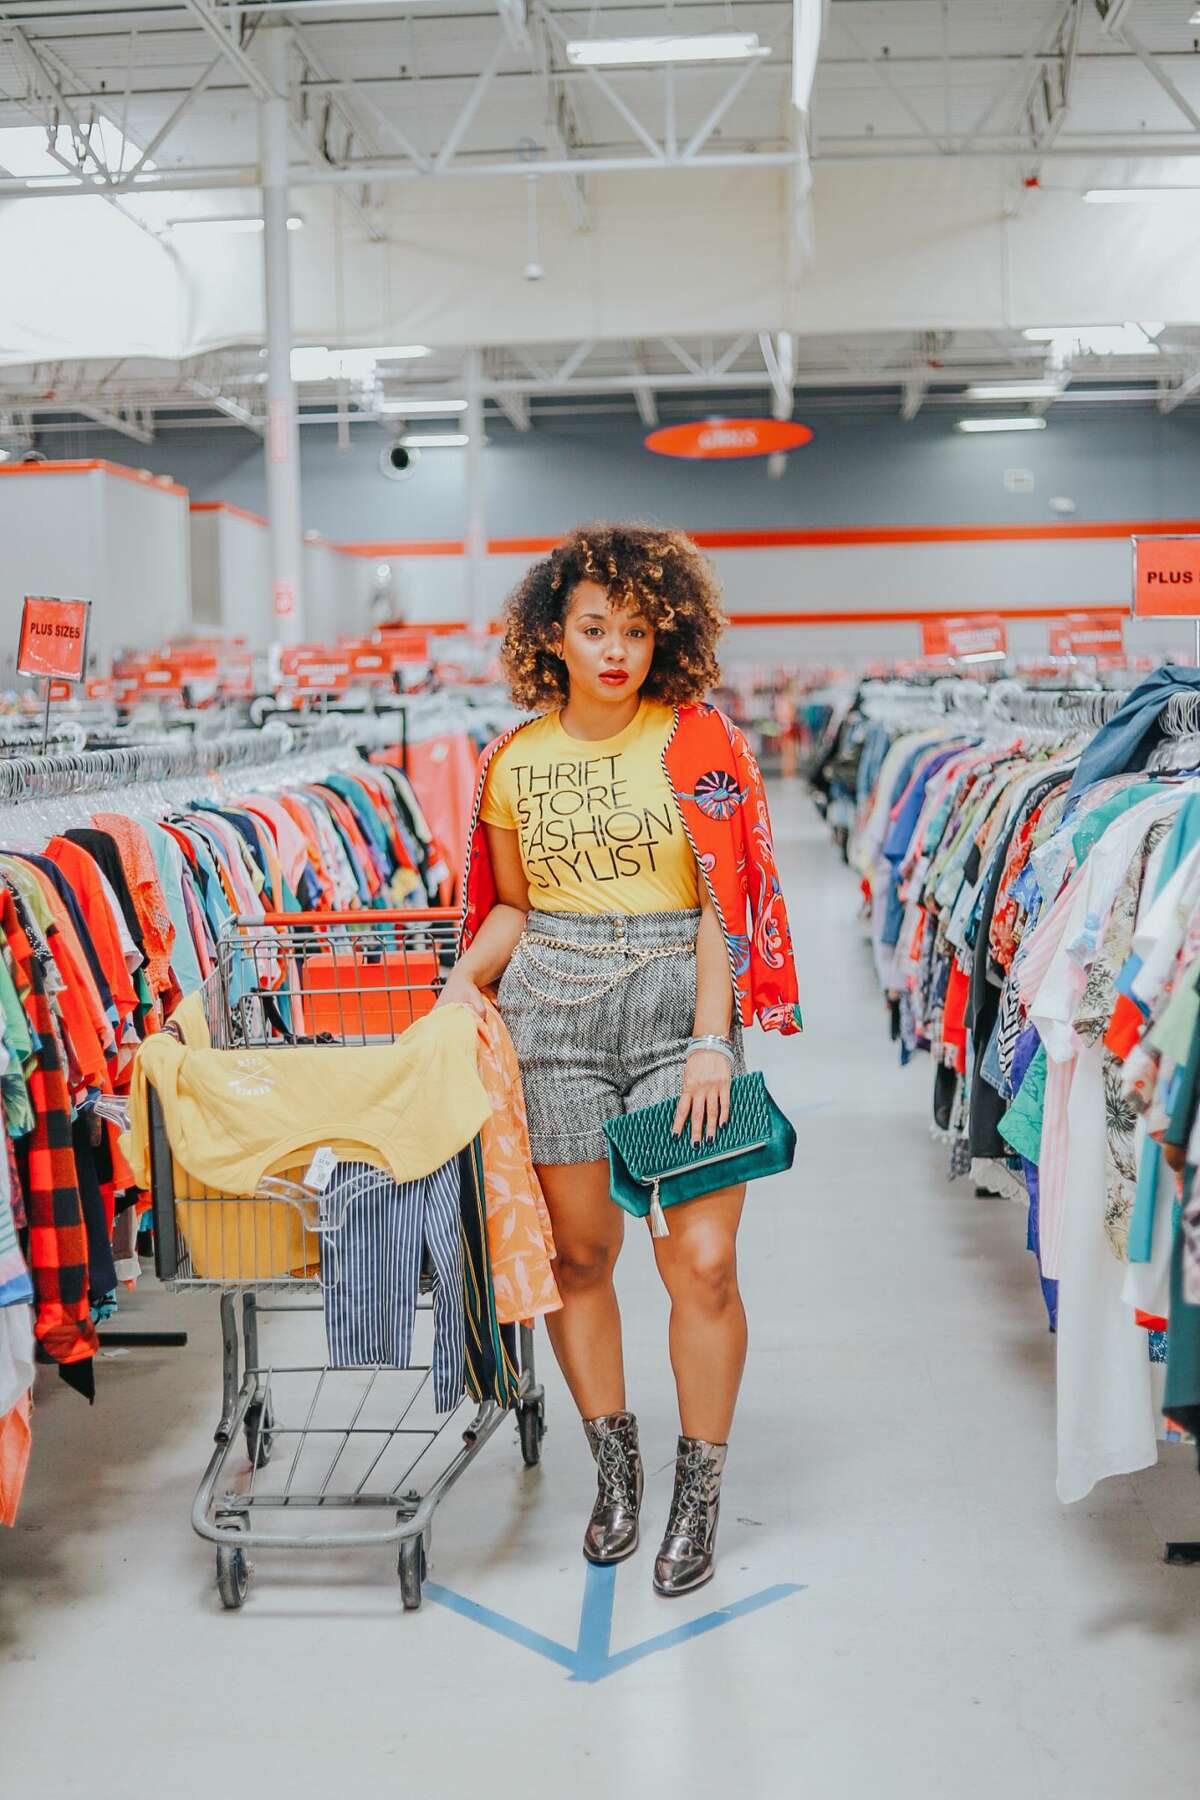 Always Check the Thrift Shop For These 3 Items: When thrift shopping, there are some pieces always worth looking at, according to thrift shopping expert, personal shopper and stylist Sharoya Hall from ImPrettyThrifty “I would say blazers, button up [blouses], and pants of all kinds.”